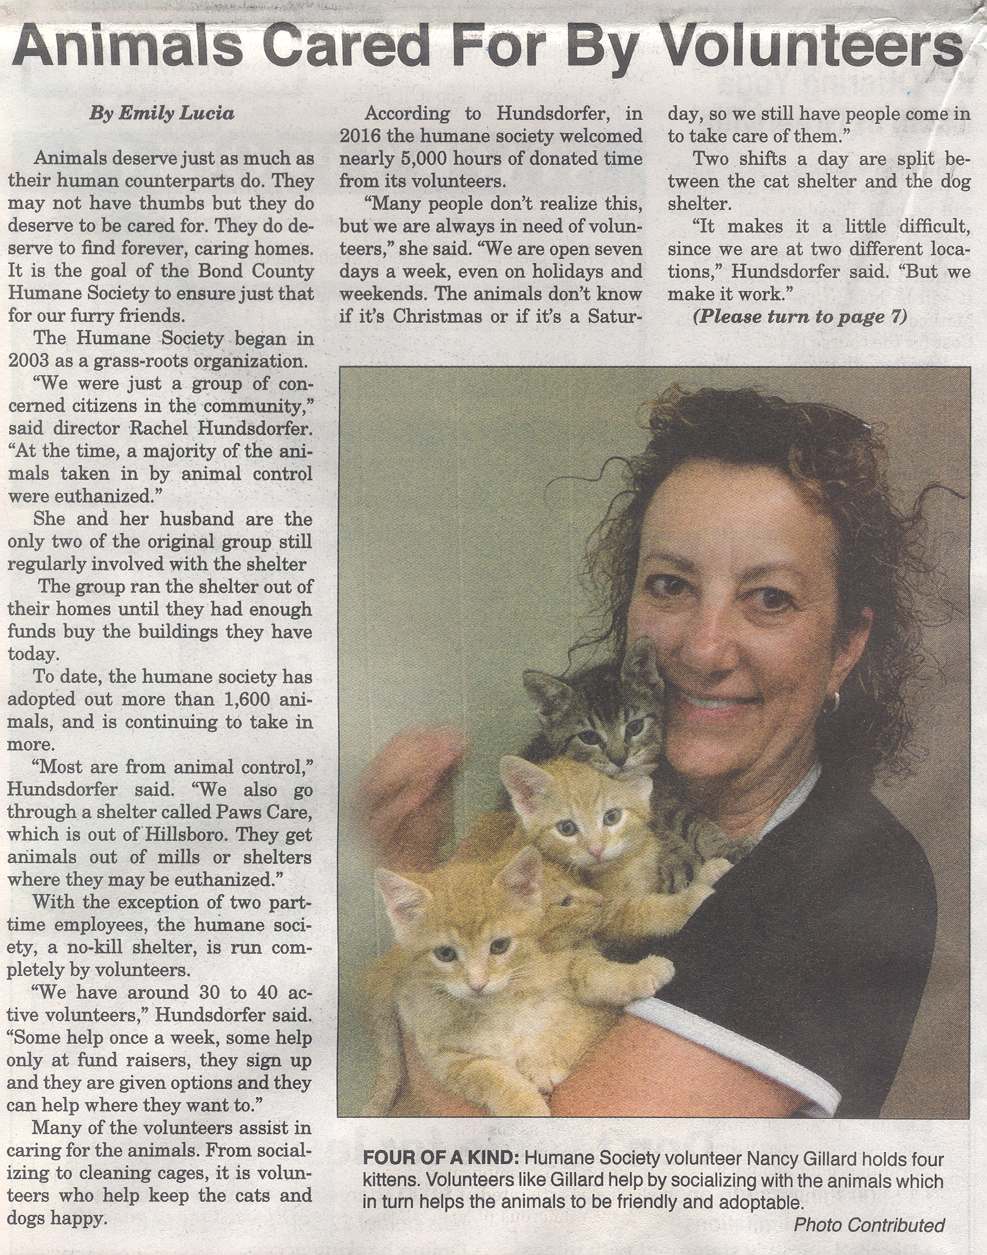 Article part 1 with photo of volunteer holding litter of kittens